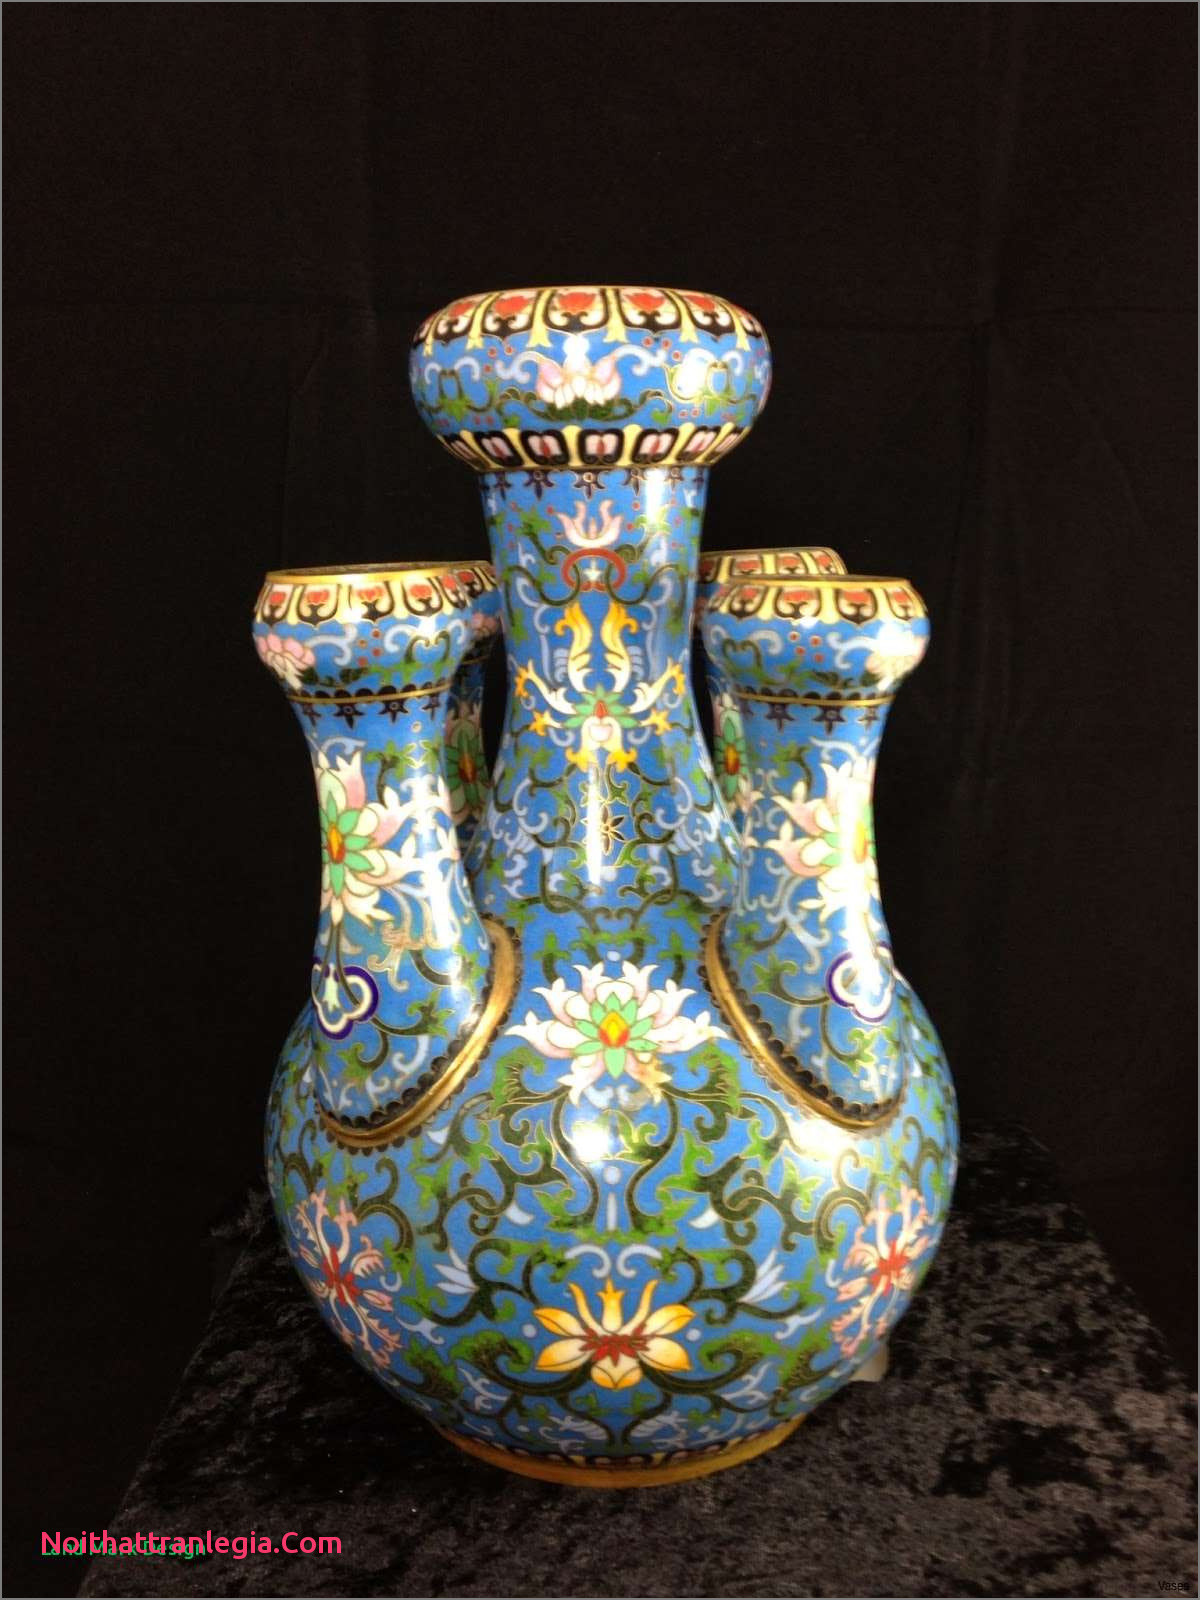 16 Stylish Vintage Japanese Vase 2024 free download vintage japanese vase of 20 chinese antique vase noithattranlegia vases design with regard to 213 1h vases antique asian the increased trade of chinese ware during 16th century has significa